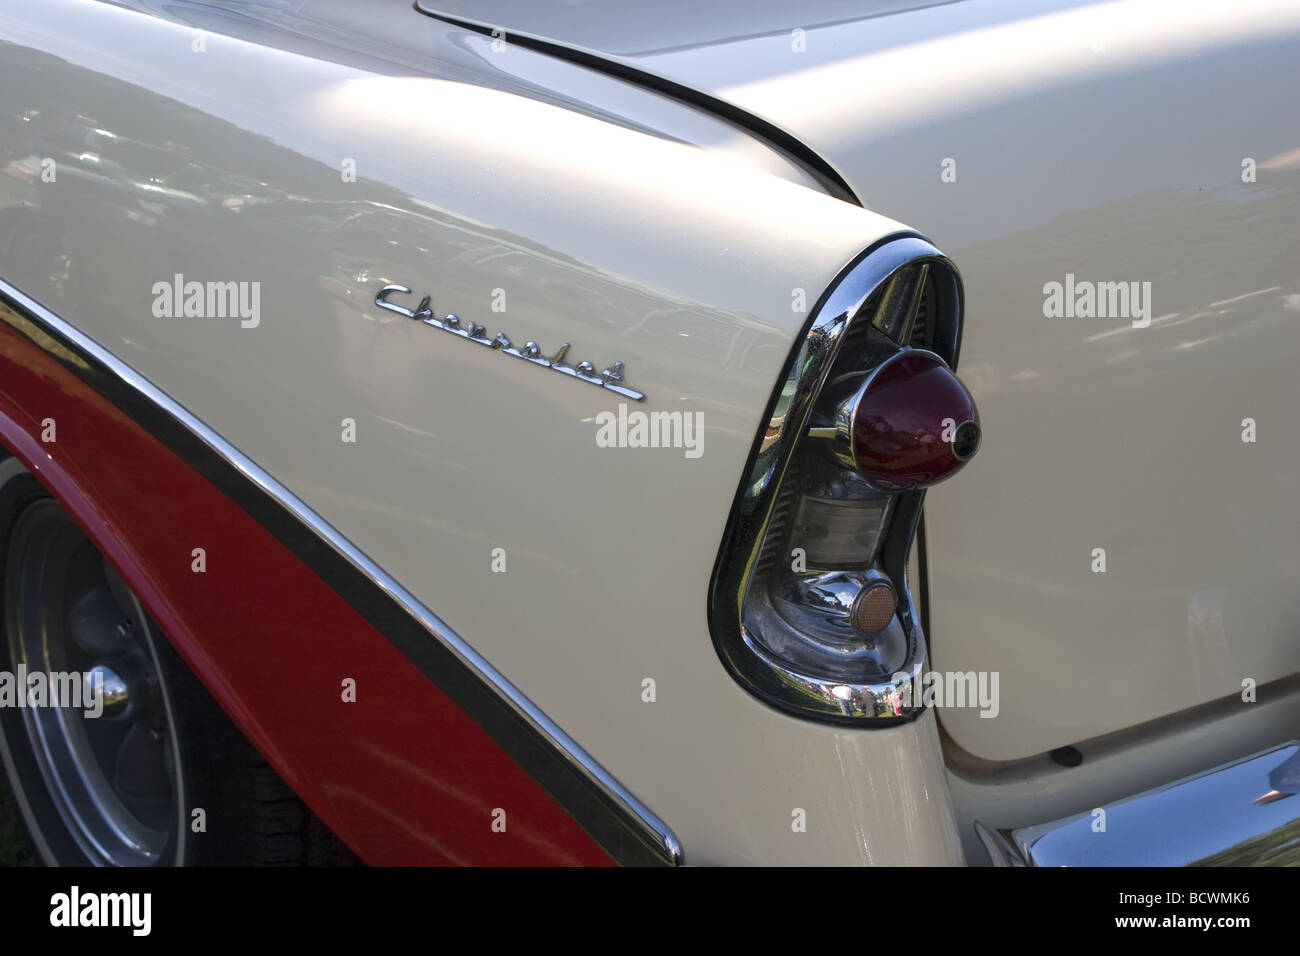 Rear wing and light of classic 1950's Chevrolet car Stock Photo